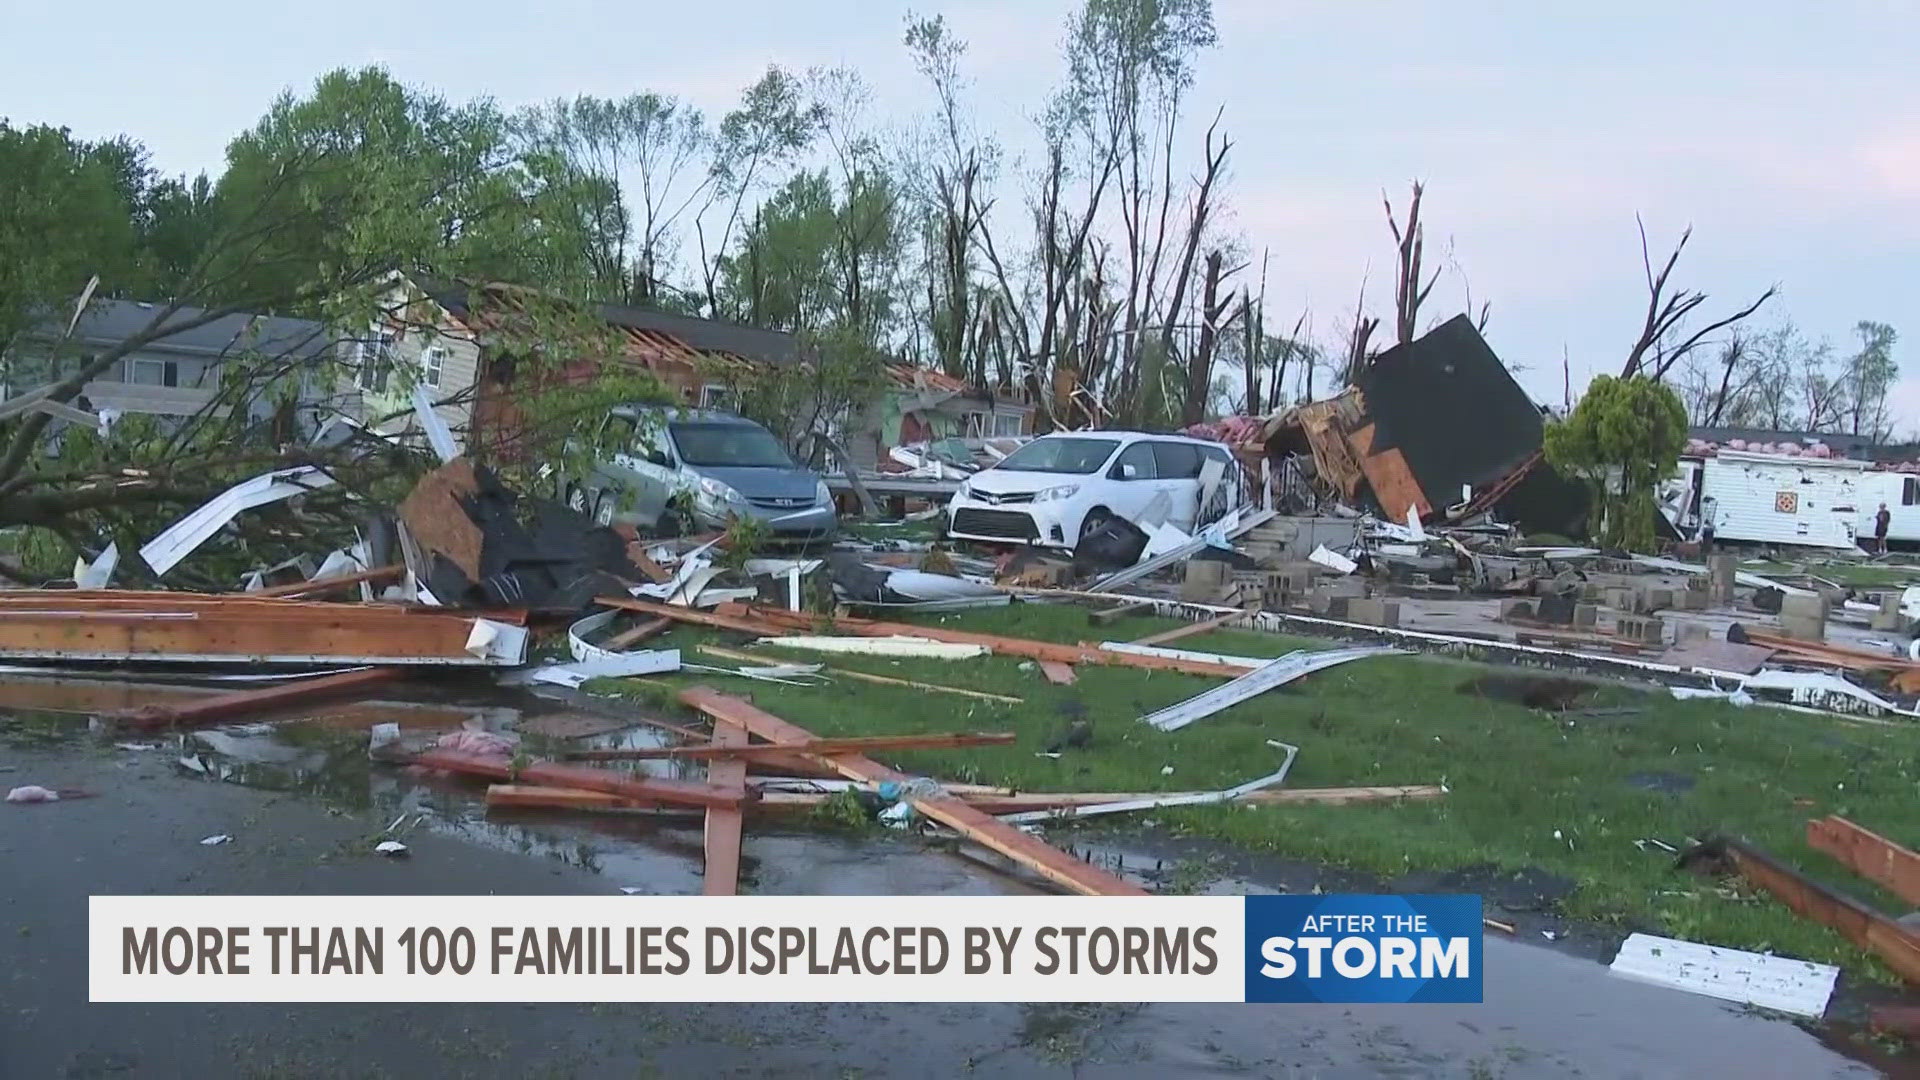 Despite on-and-off rain, the Portage community continues cleaning up the destruction left behind by that powerful EF-2 tornado that rolled through Tuesday evening.